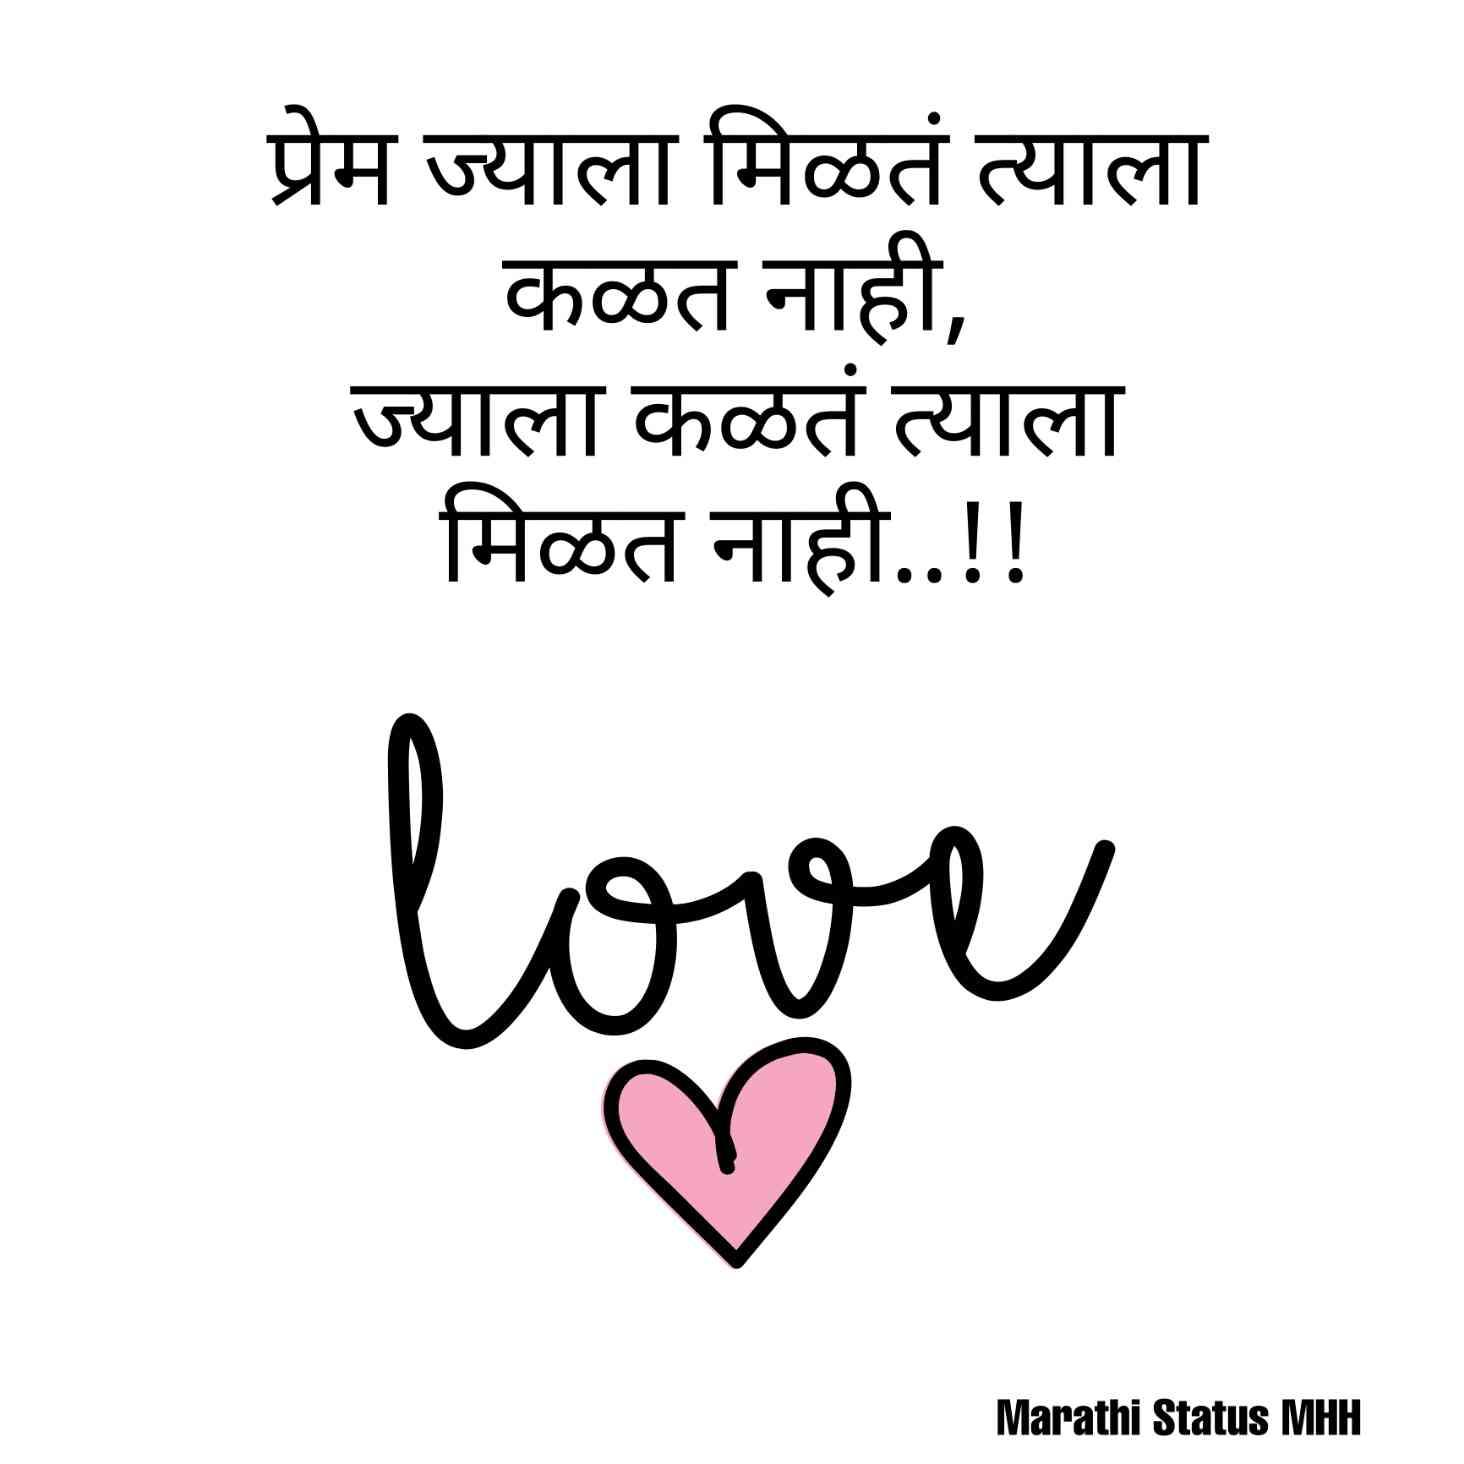 Romantic Heart touching love quotes in marathi